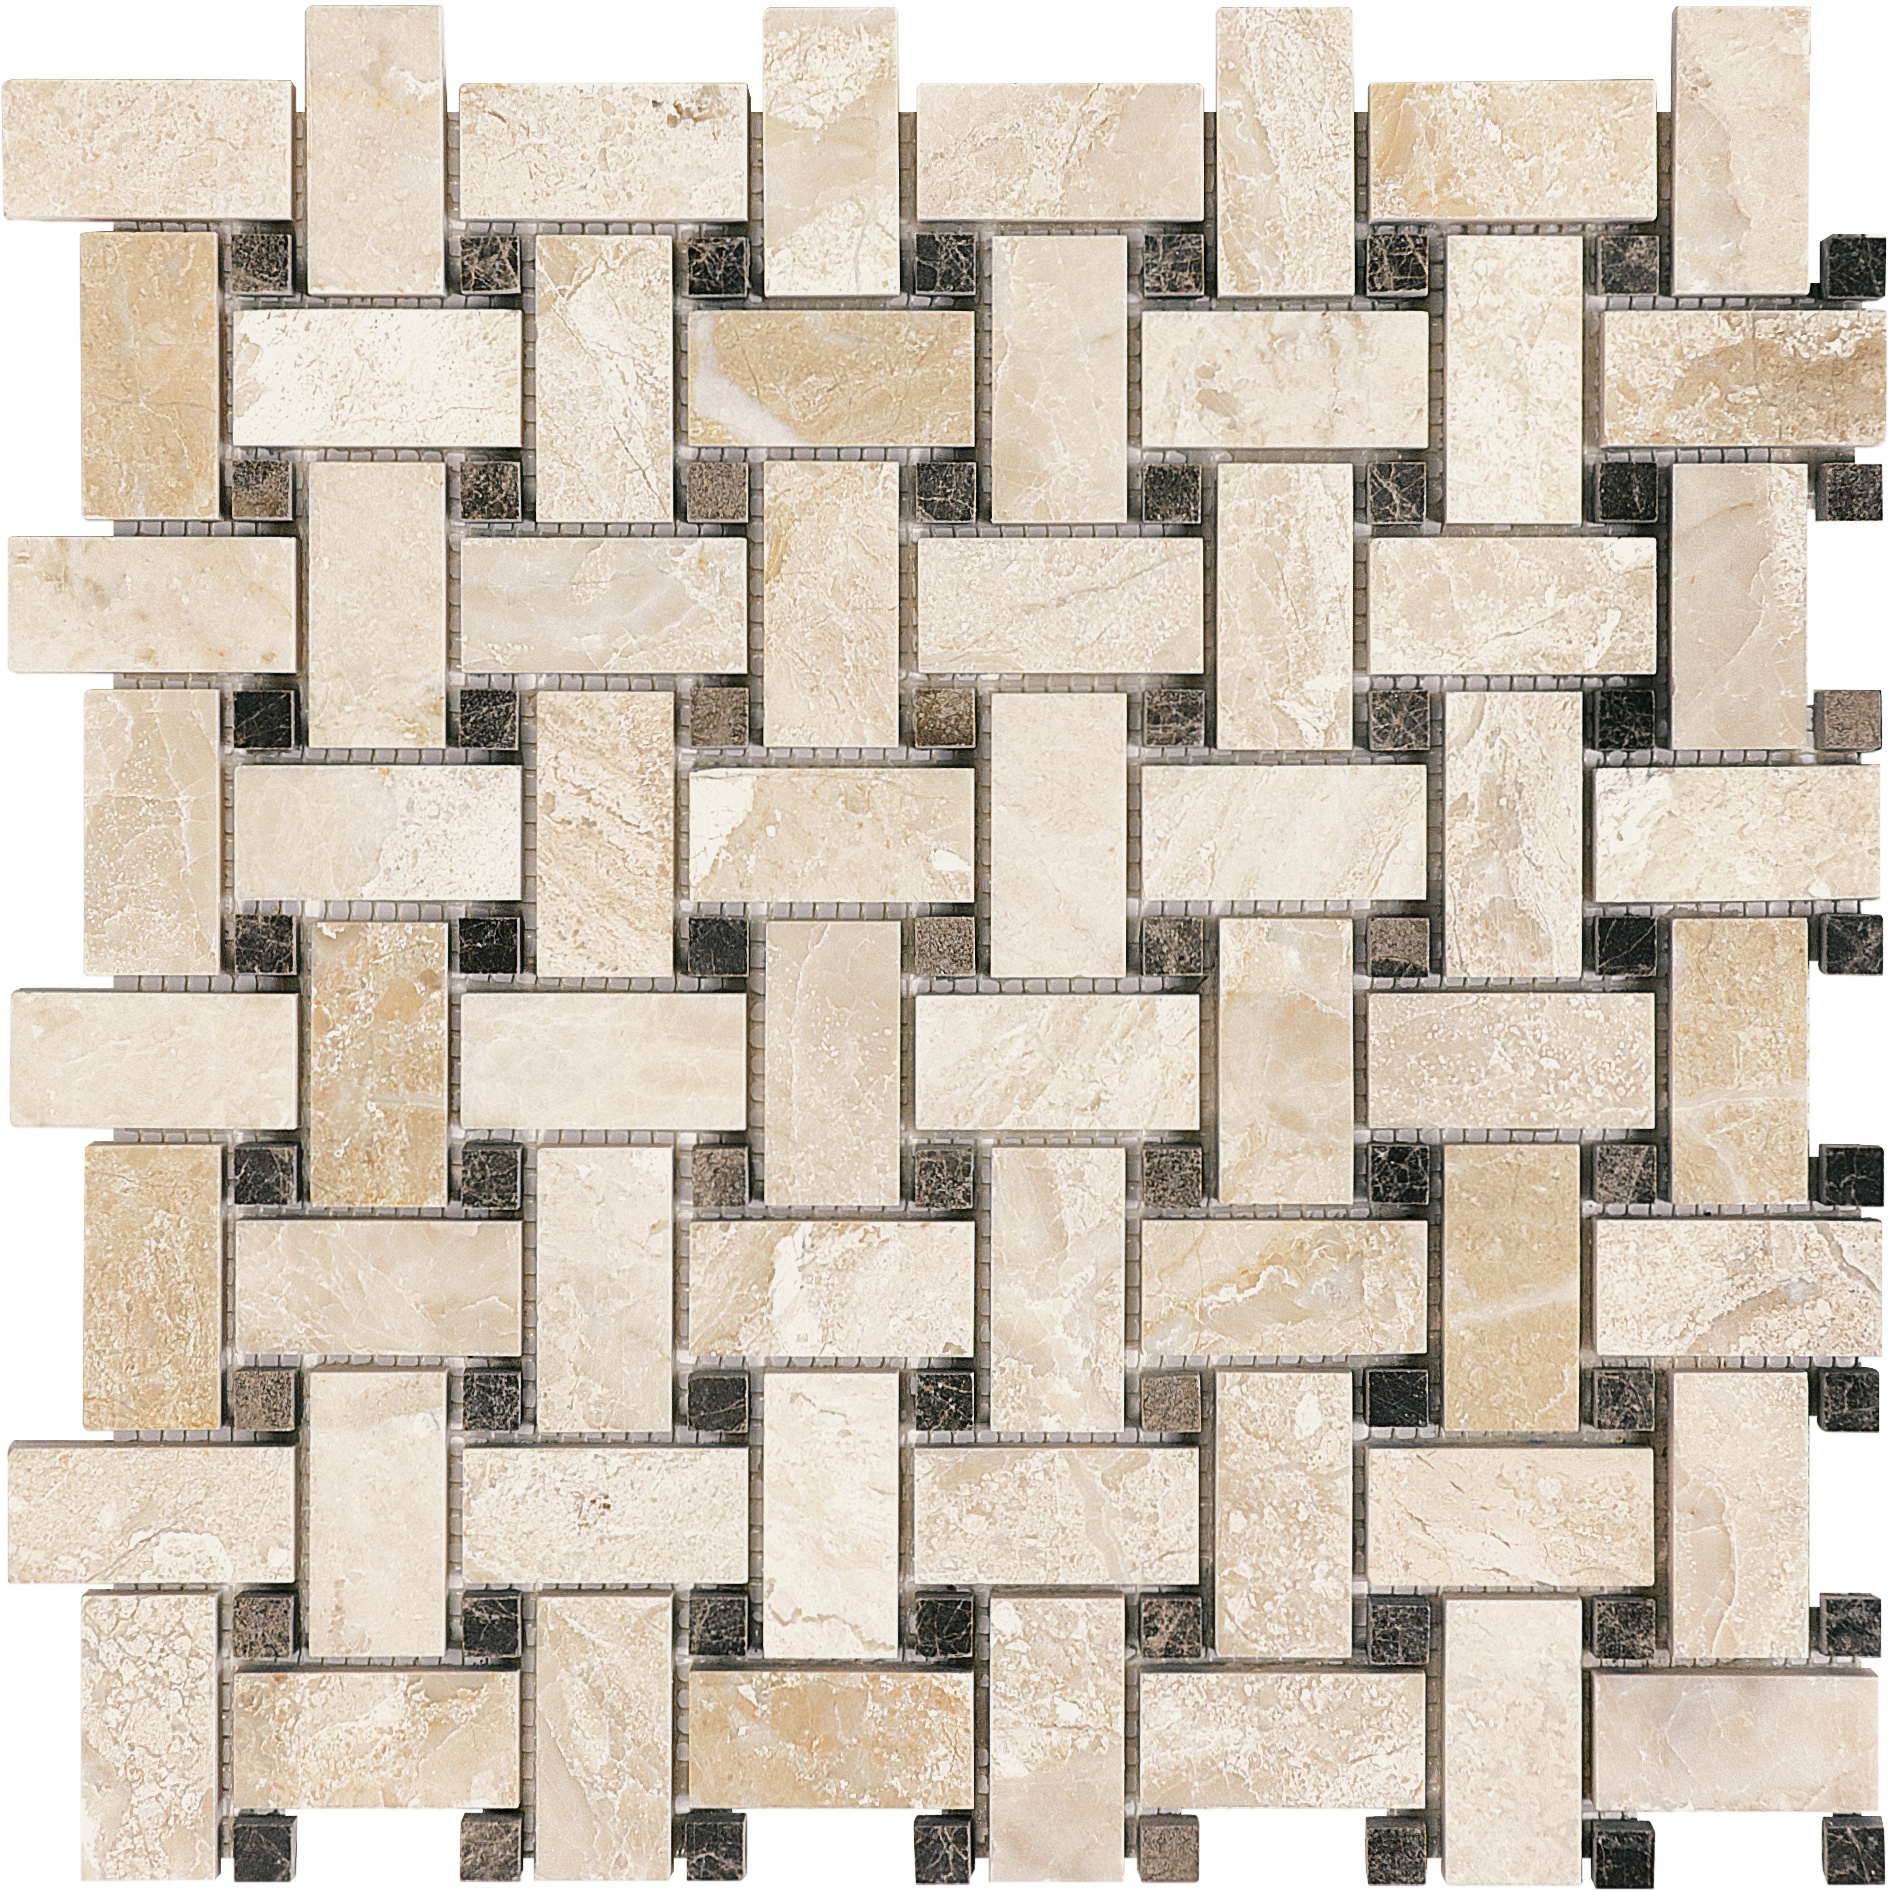 marble basketweave 2x2-inch pattern natural stone mosaic from impero reale anatolia collection distributed by surface group international honed finish straight edge edge mesh shape